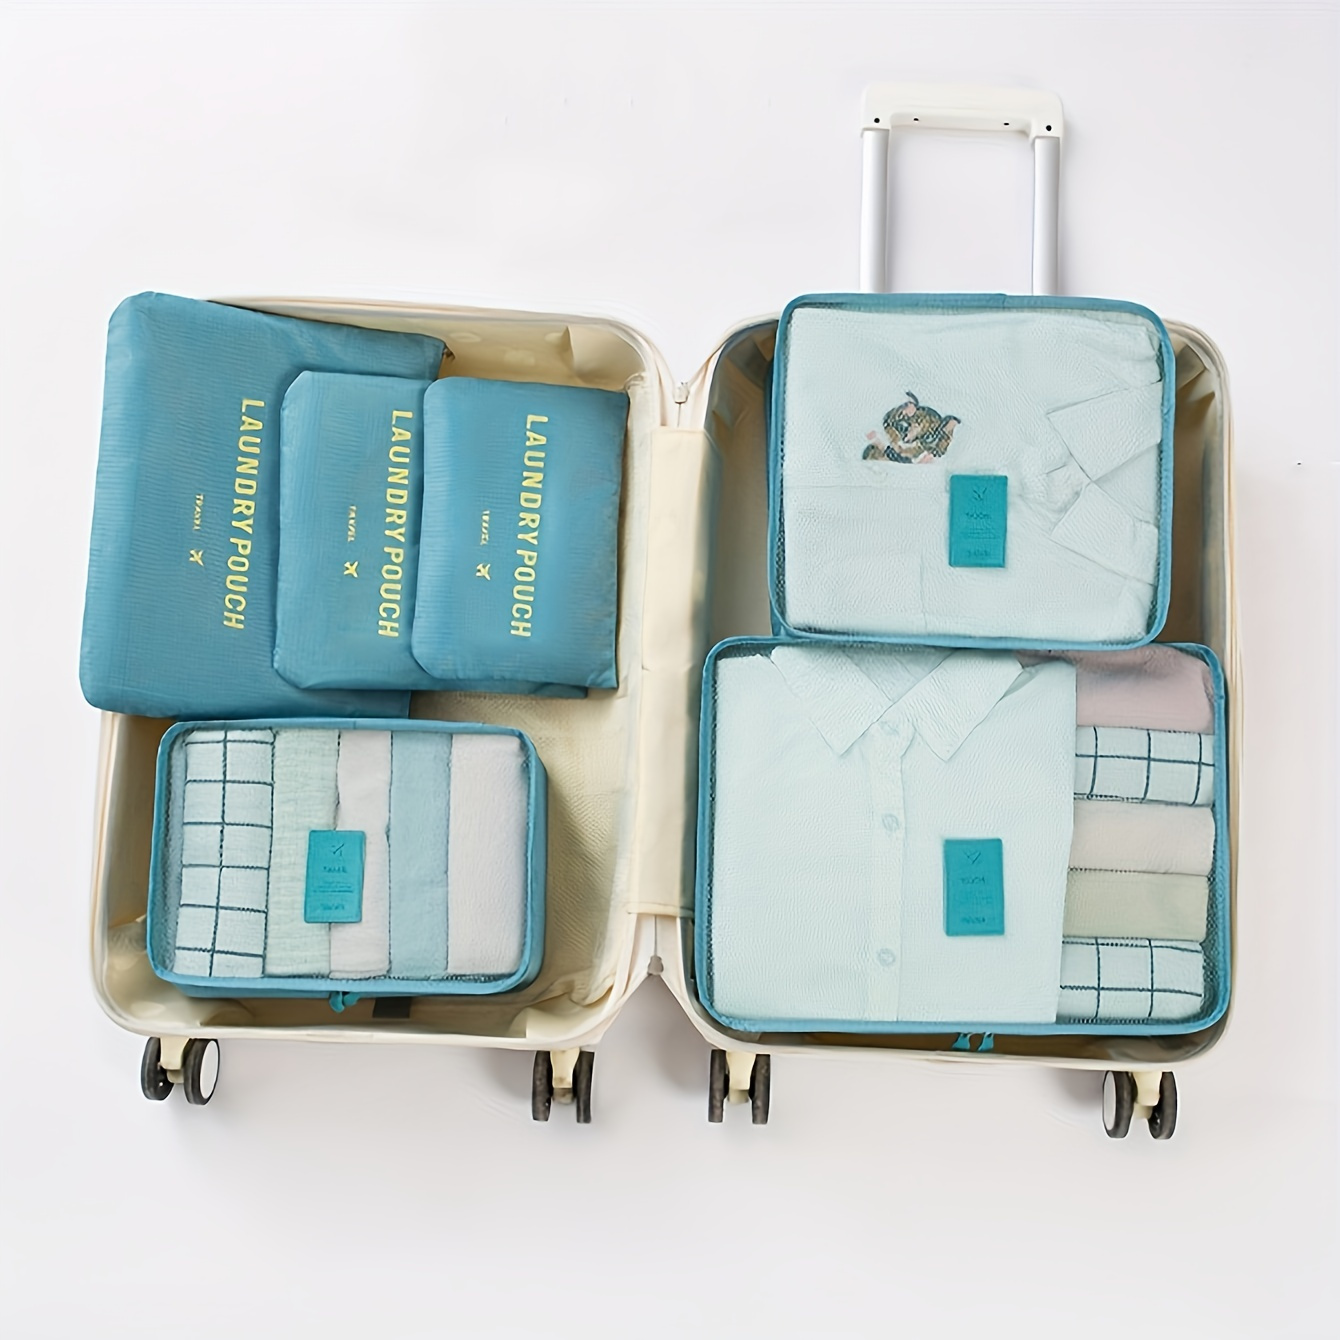 

6pcs Travel Organizer Set, Polyester Packing Cubes For Suitcase, Clothing Storage Bags, Luggage Organizers With Various Sizes